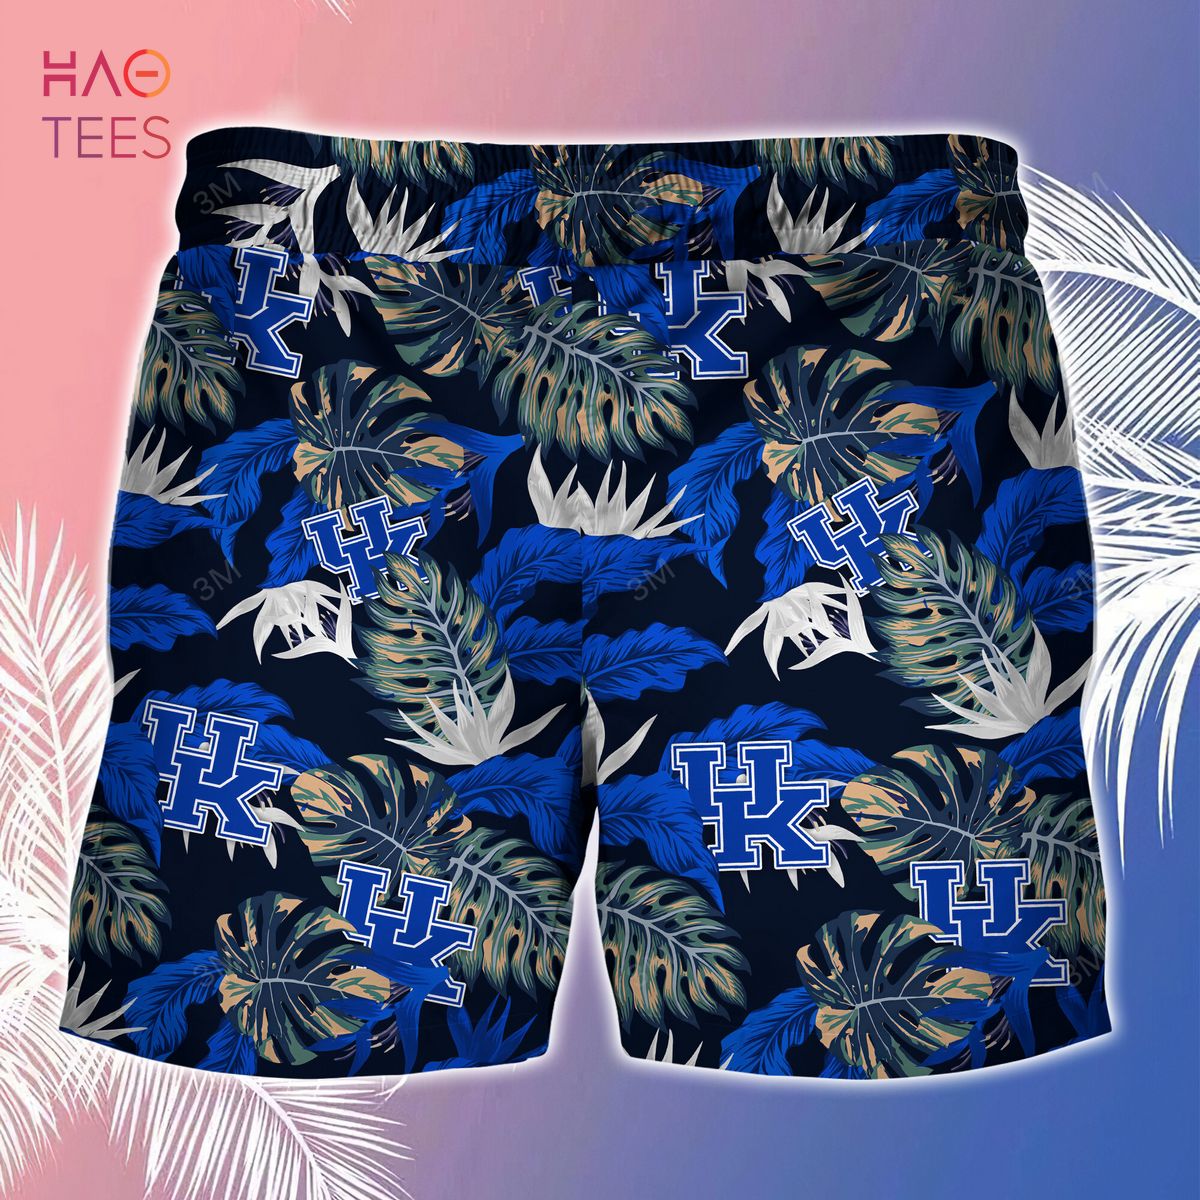 [LIMITED] Kentucky Wildcats  Summer Hawaiian Shirt And Shorts, Stress Blessed Obsessed For Fans